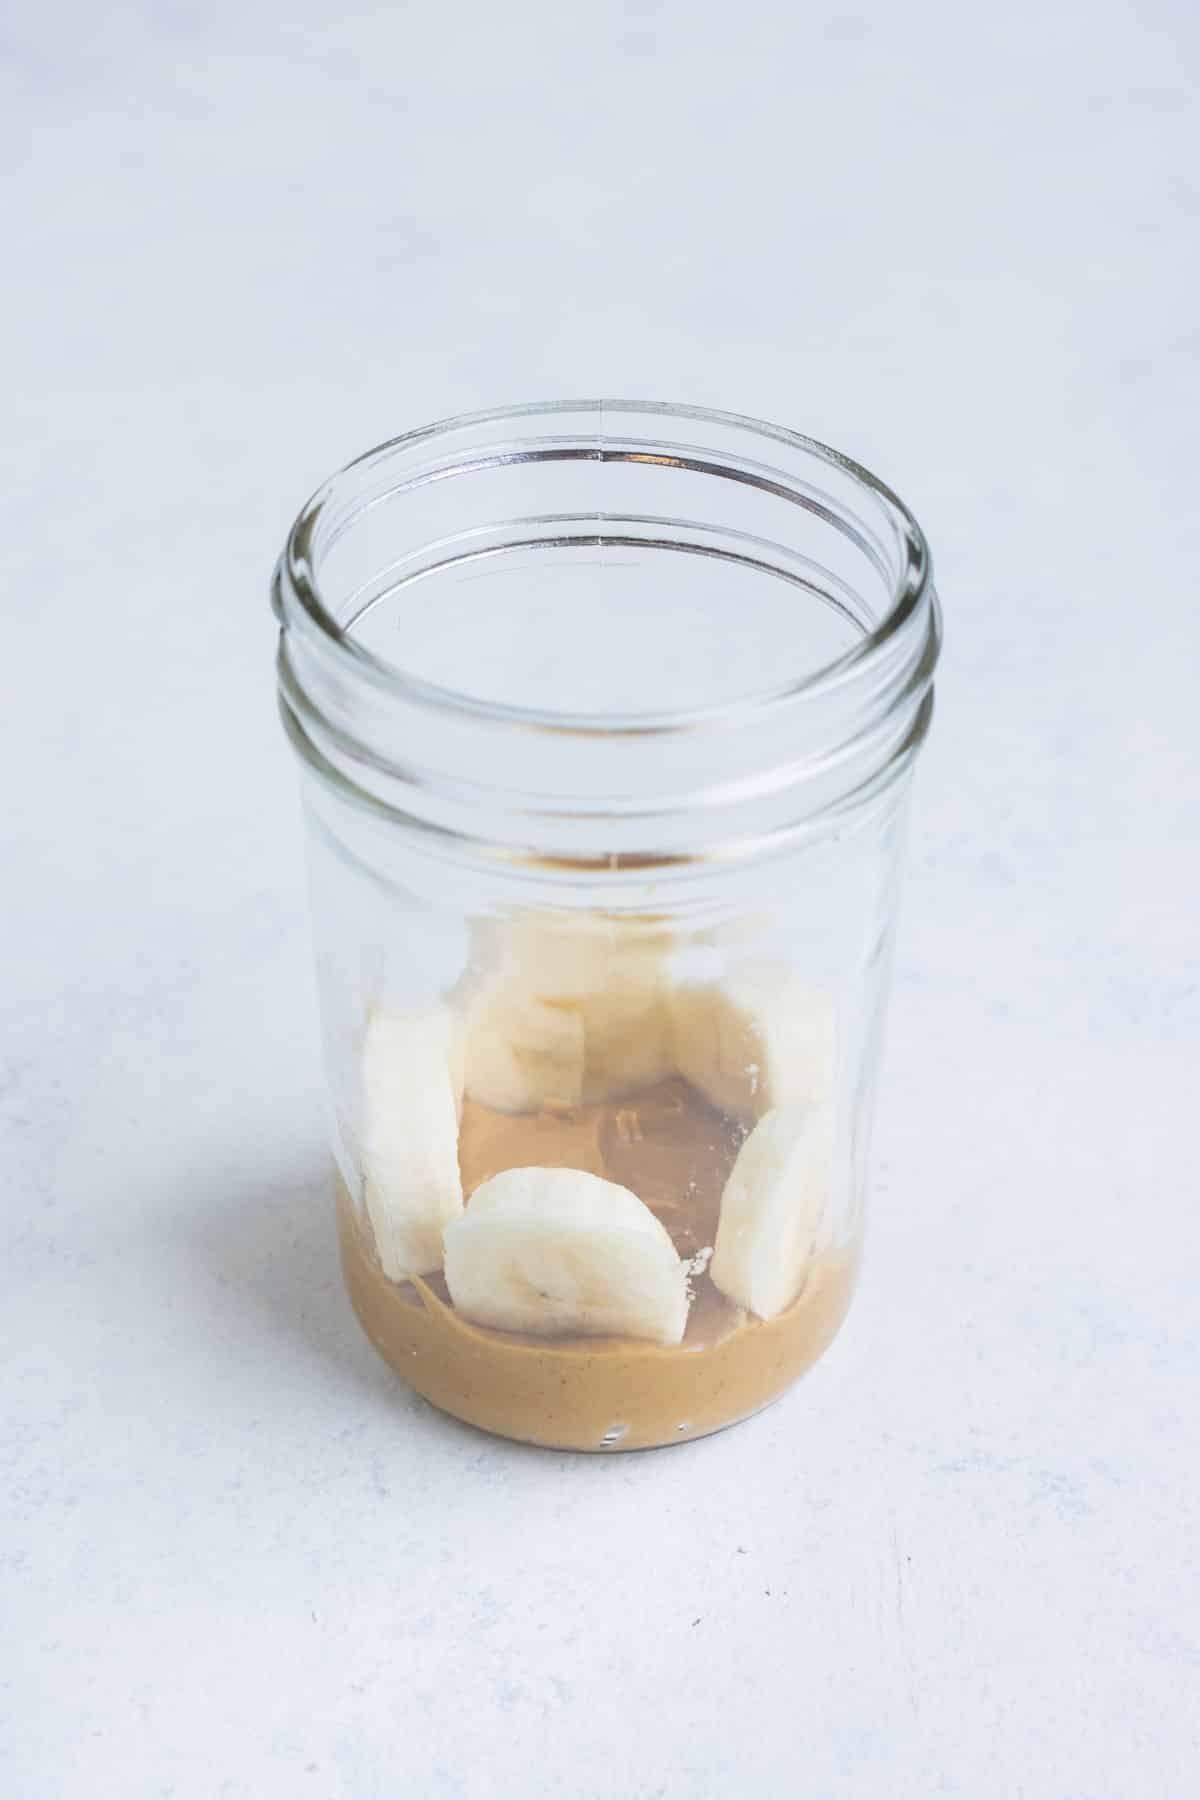 Peanut Butter and Banana are added to the jar.